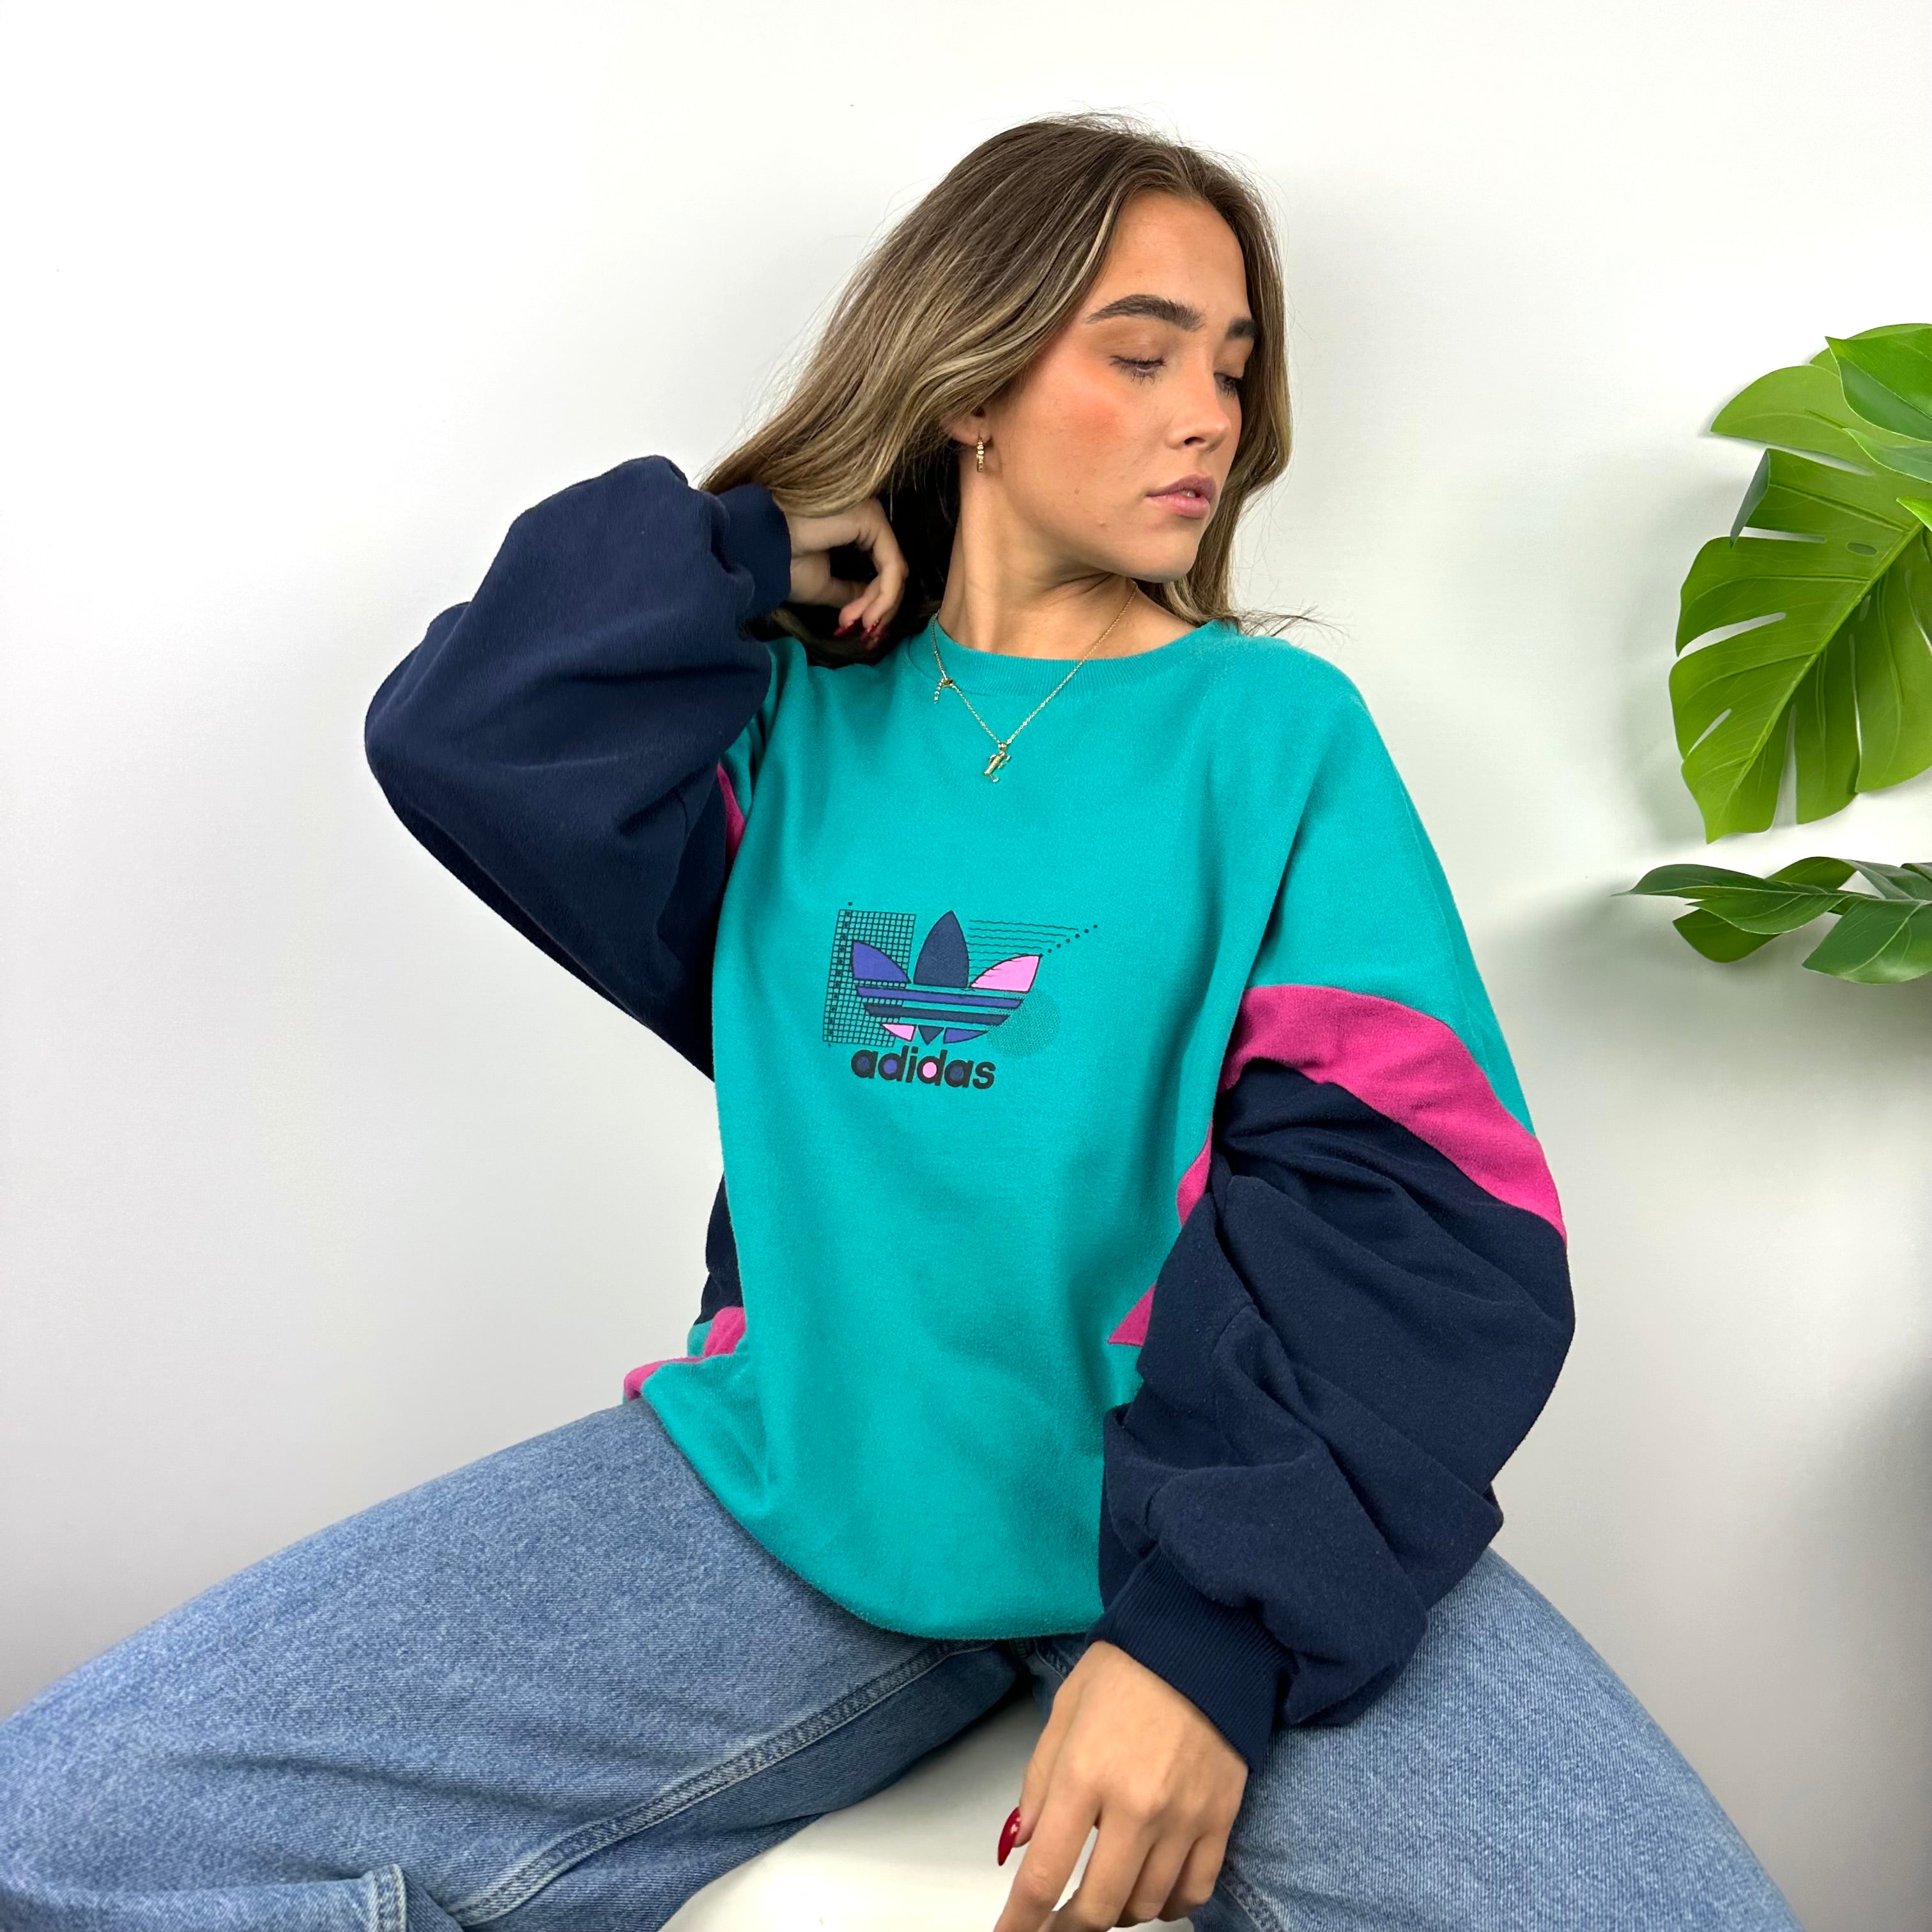 Adidas Turquoise Blue Spell Out Sweatshirt (XL)